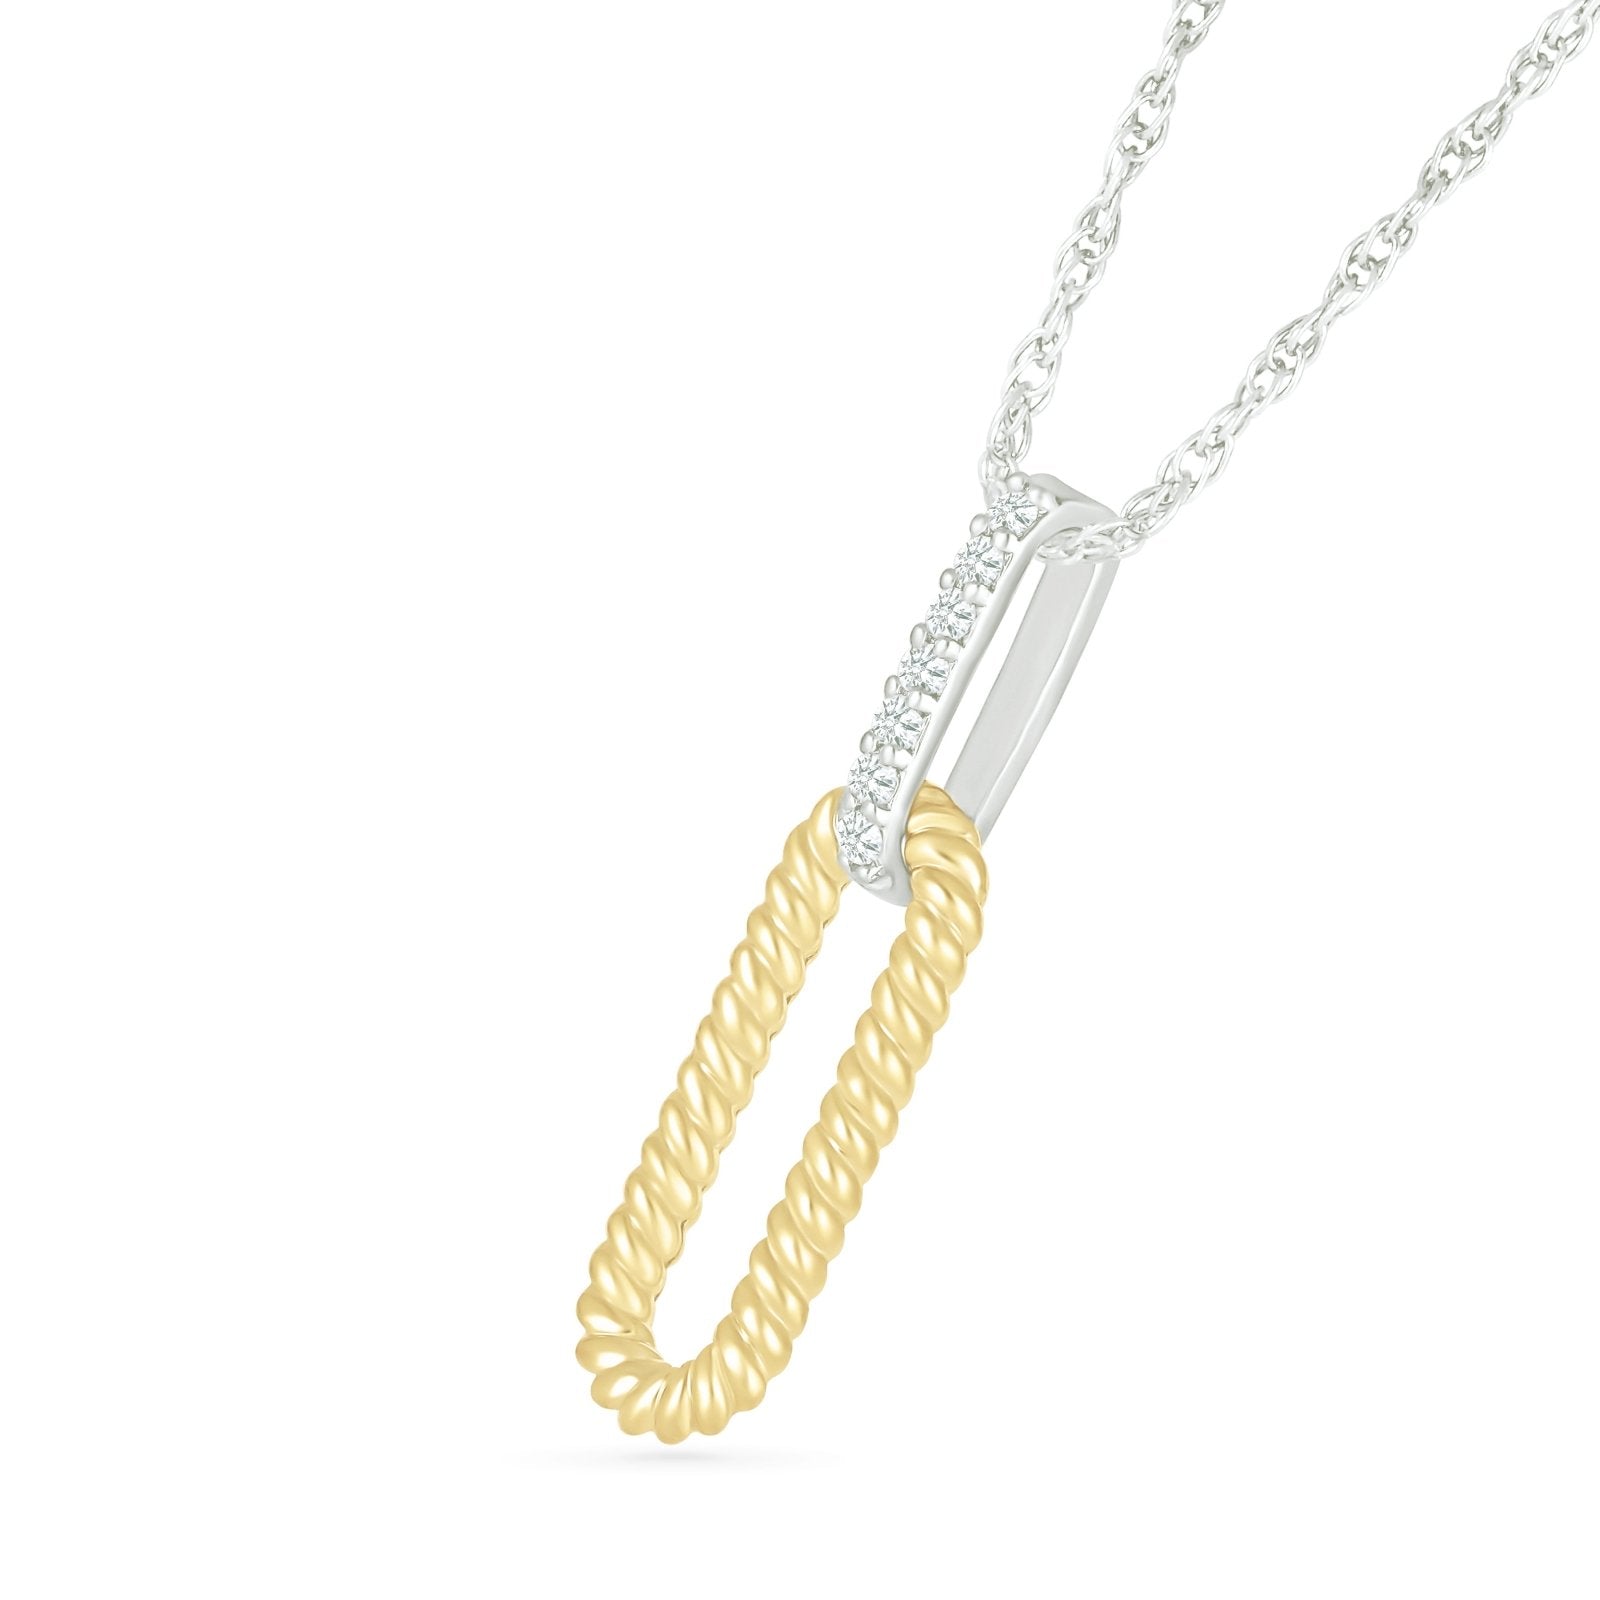 Interlocking Braided Gold and Diamond Paperclip Necklace Necklaces Estella Collection #product_description# 32718 925 Diamond Made to Order #tag4# #tag5# #tag6# #tag7# #tag8# #tag9# #tag10#